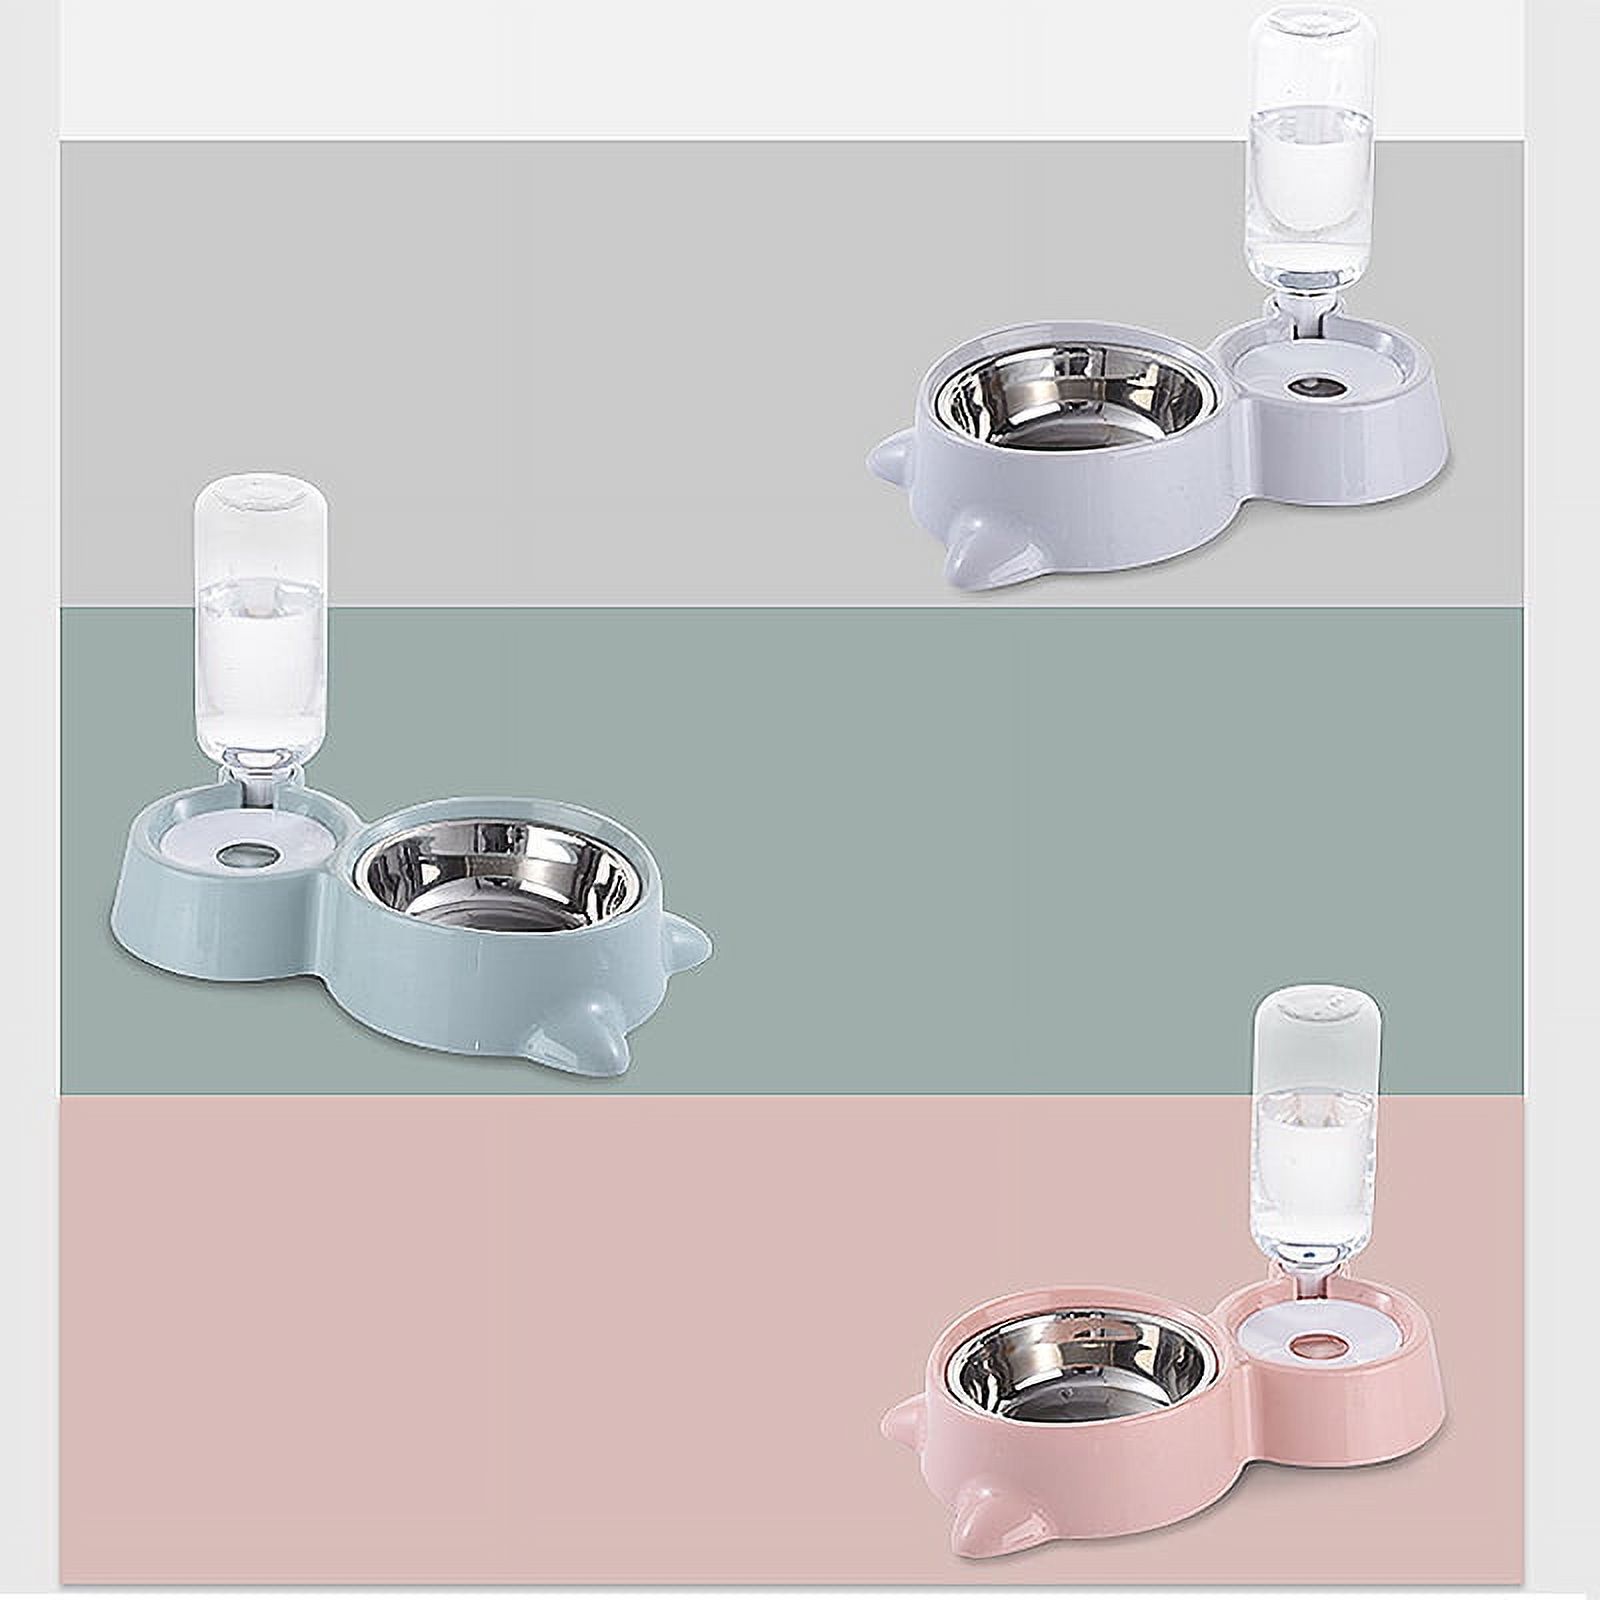 Automatic Pet Feeder Water Dispenser Cat Dog Drinking Bowl Dogs Feeder Dish Double Bowl;Automatic Pet Feeder Water Dispenser Cat Dog Drinking Bowl Dogs Feeder Dish - image 3 of 8